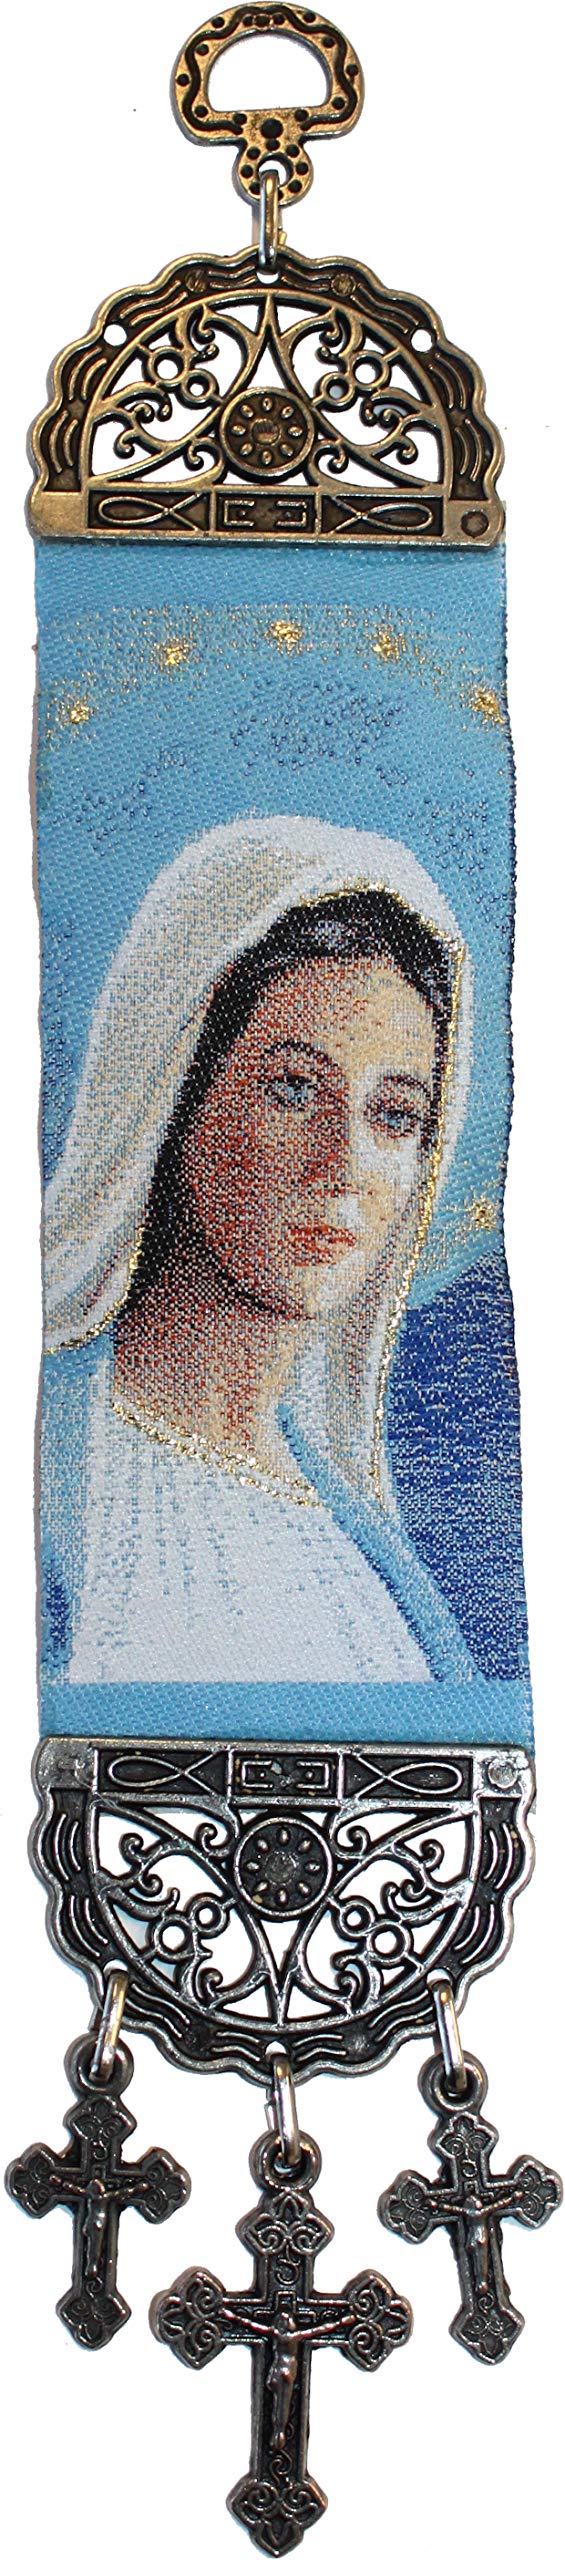 Holy Land Market Wall Hanging Tapestry of The Blessed Mother Mary - with Heat Printing on Synthetic Cloth Decorated - Style I (10 x 2 Inches)